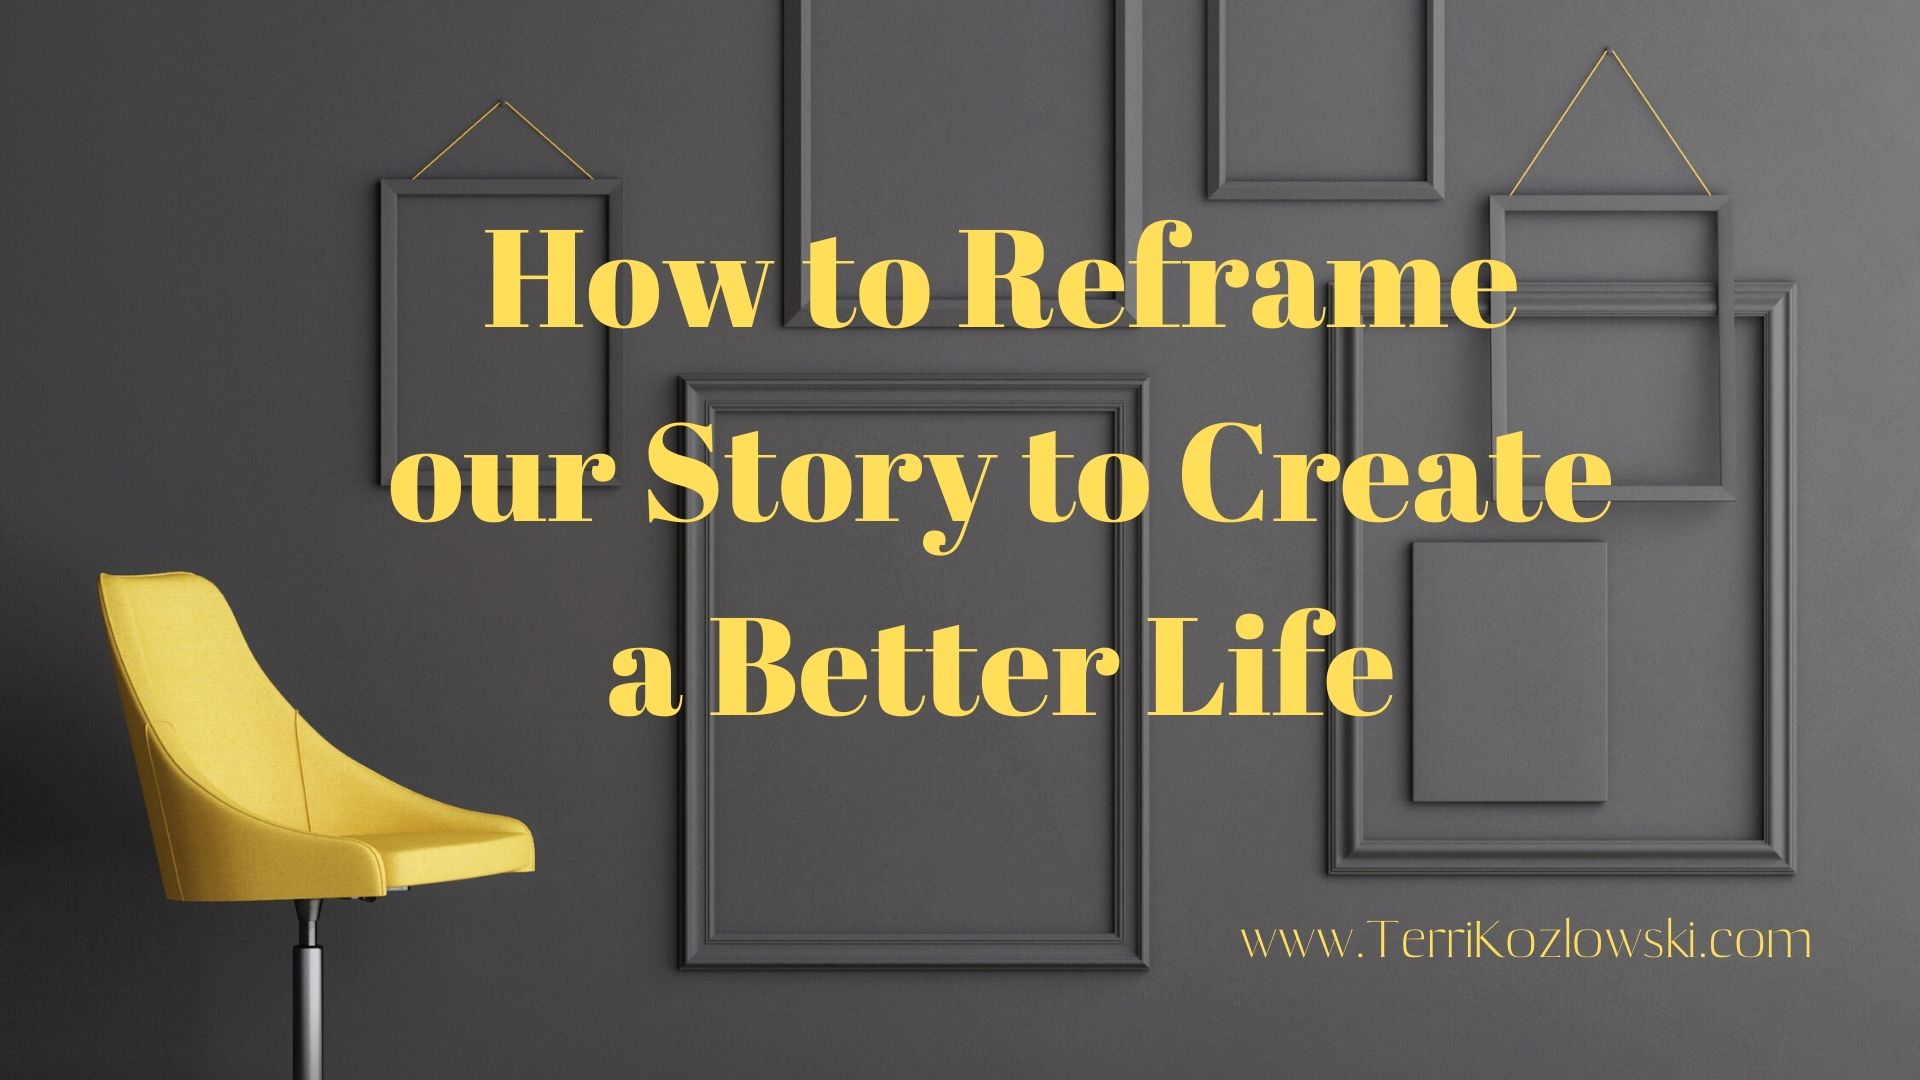 How to Reframe Our Story to Create a Better Life